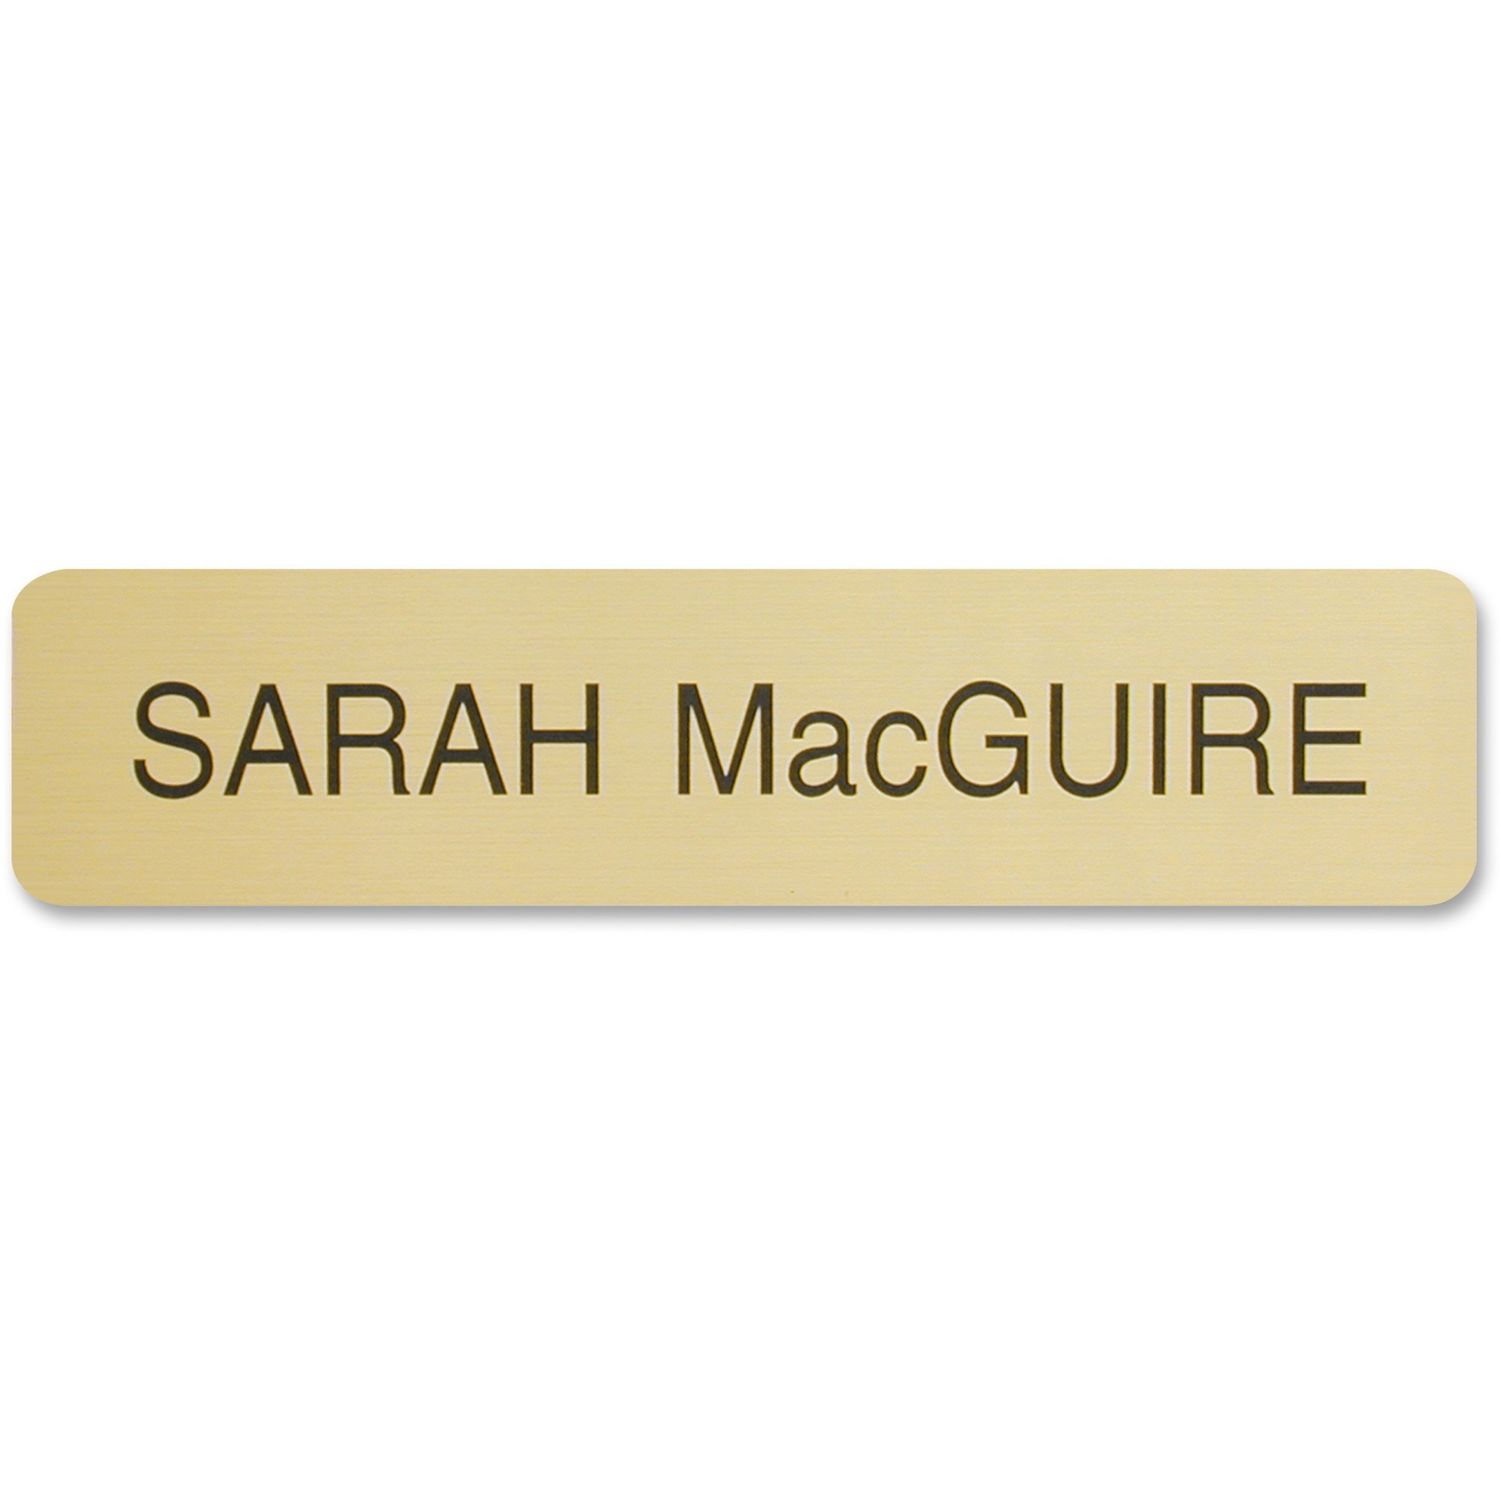 2"x8" Designer Name Plate Only 1 Each, 8" Width x 2" Height, Rectangular Shape, Rounded Corner, Plastic, Assorted